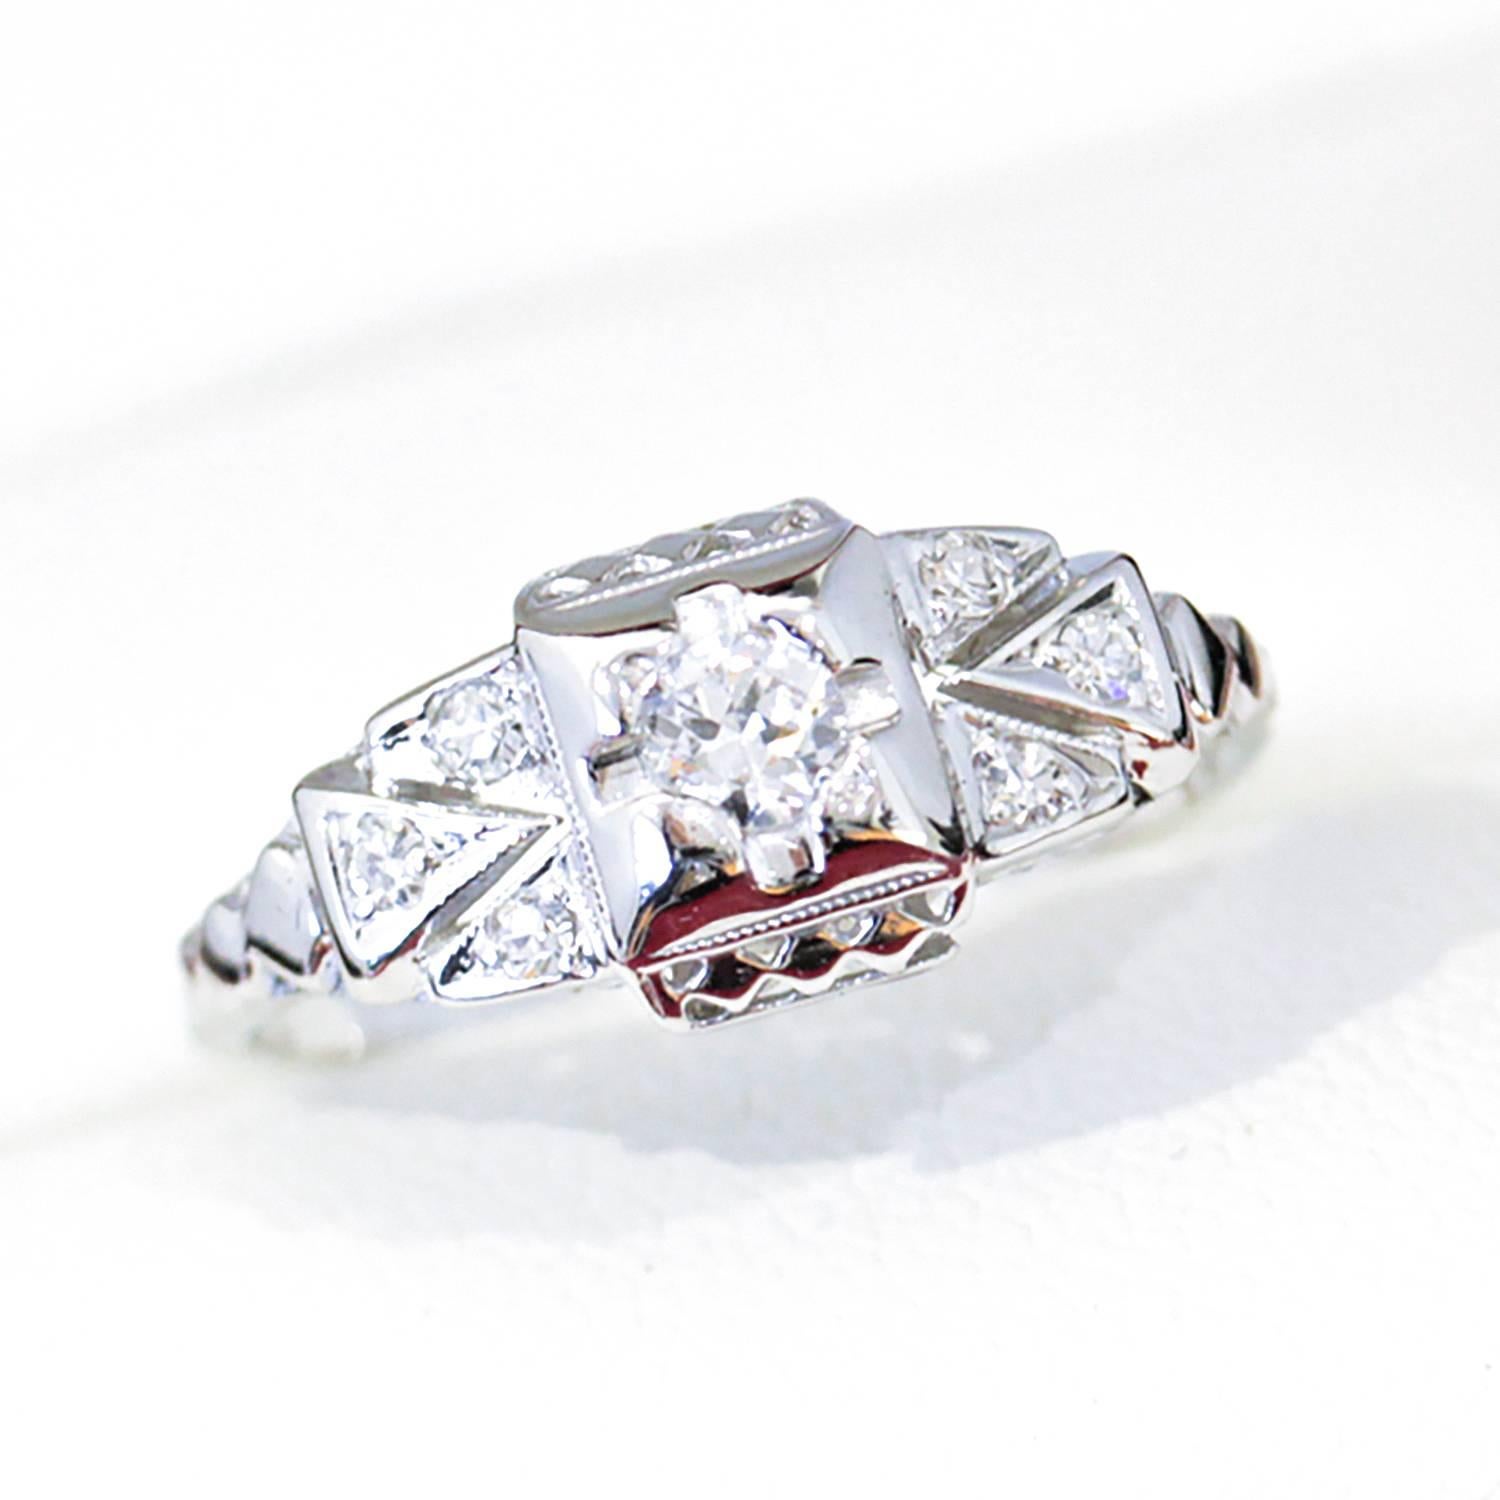 Women's Art Deco Diamond and White Gold Filigree Engagement Ring For Sale